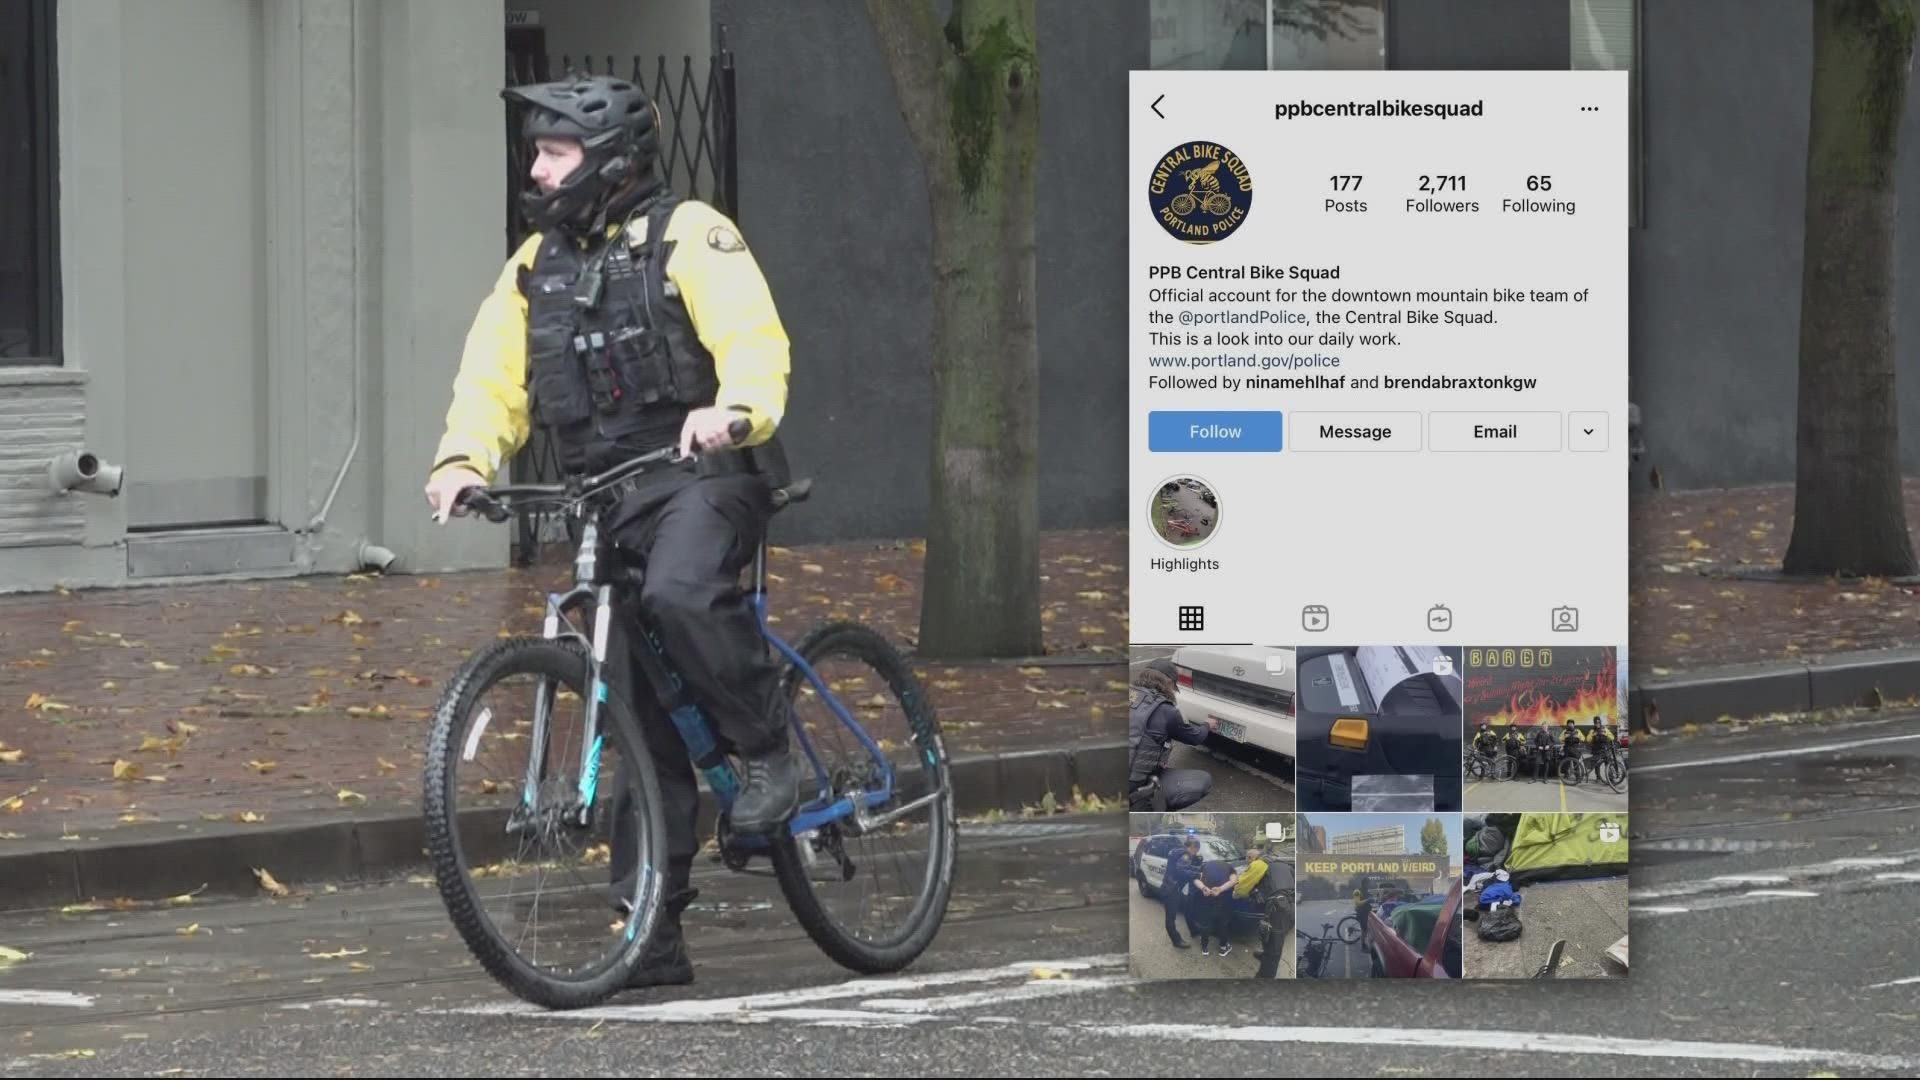 The account highlights the work of the Central Bike Squad, often in Old Town. Officer David Baer runs the page